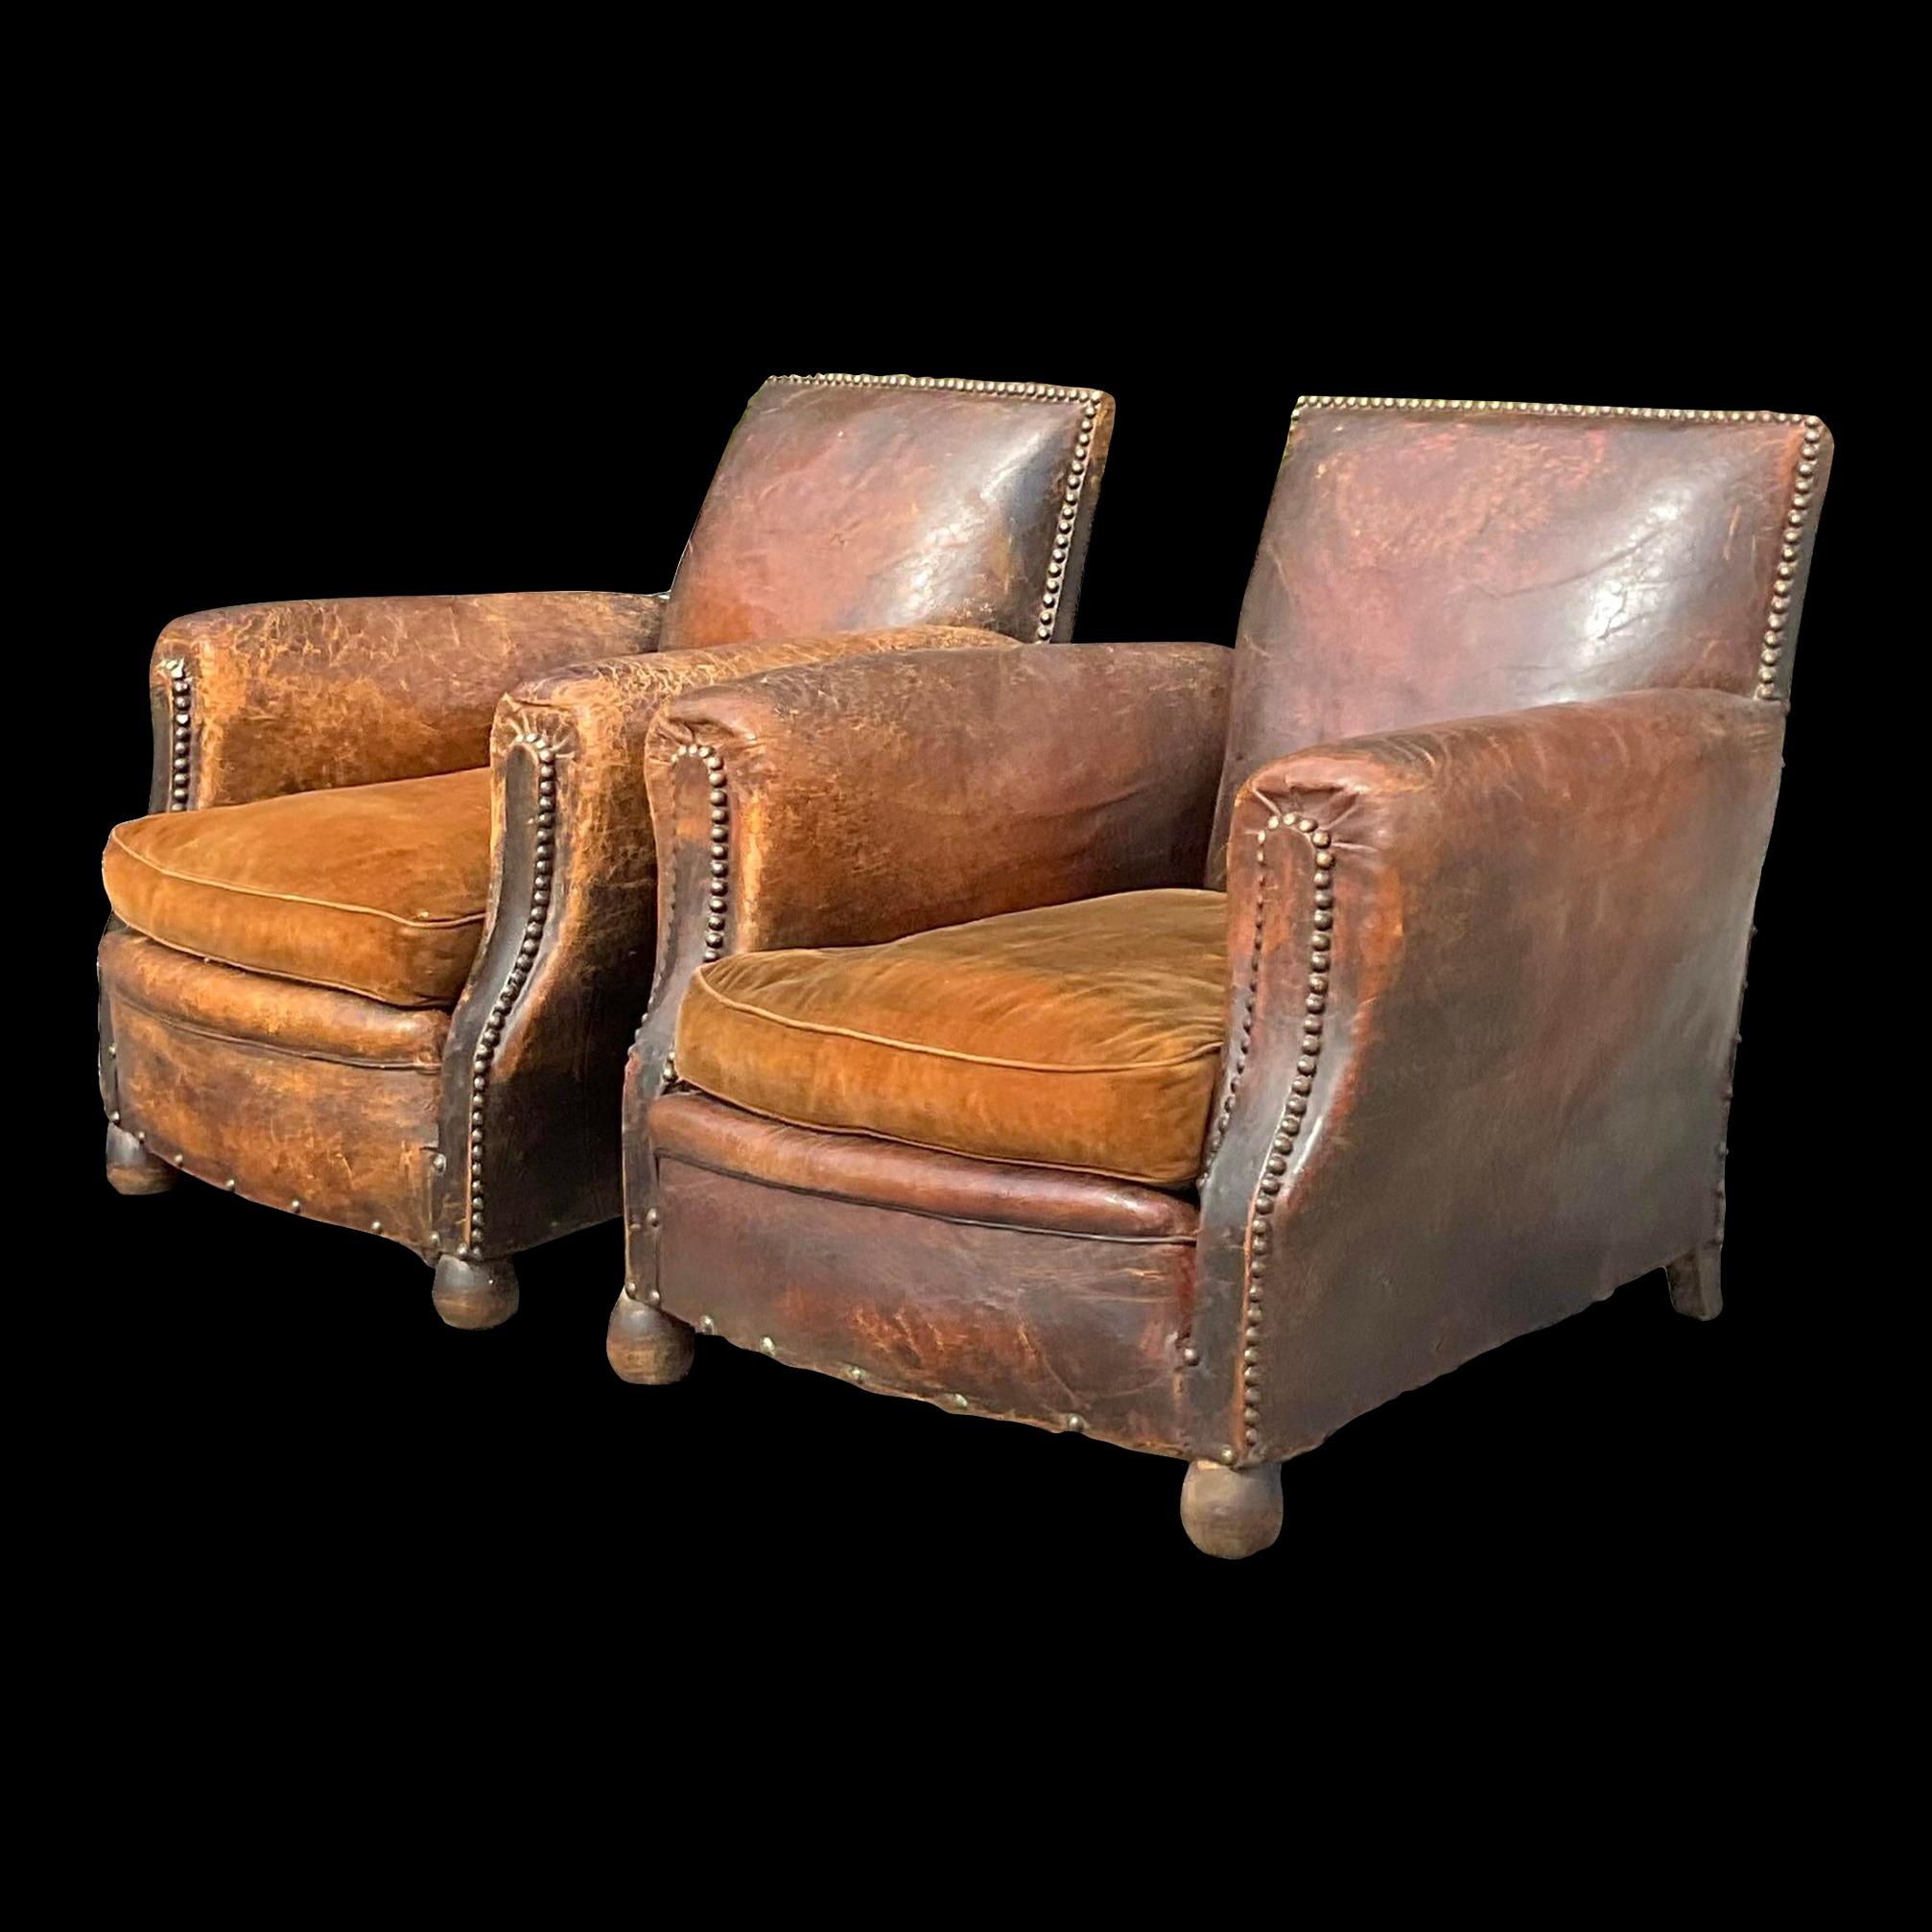 Vintage Boho Distressed French Art Deco Leather Club Chairs - a Pair For Sale 7